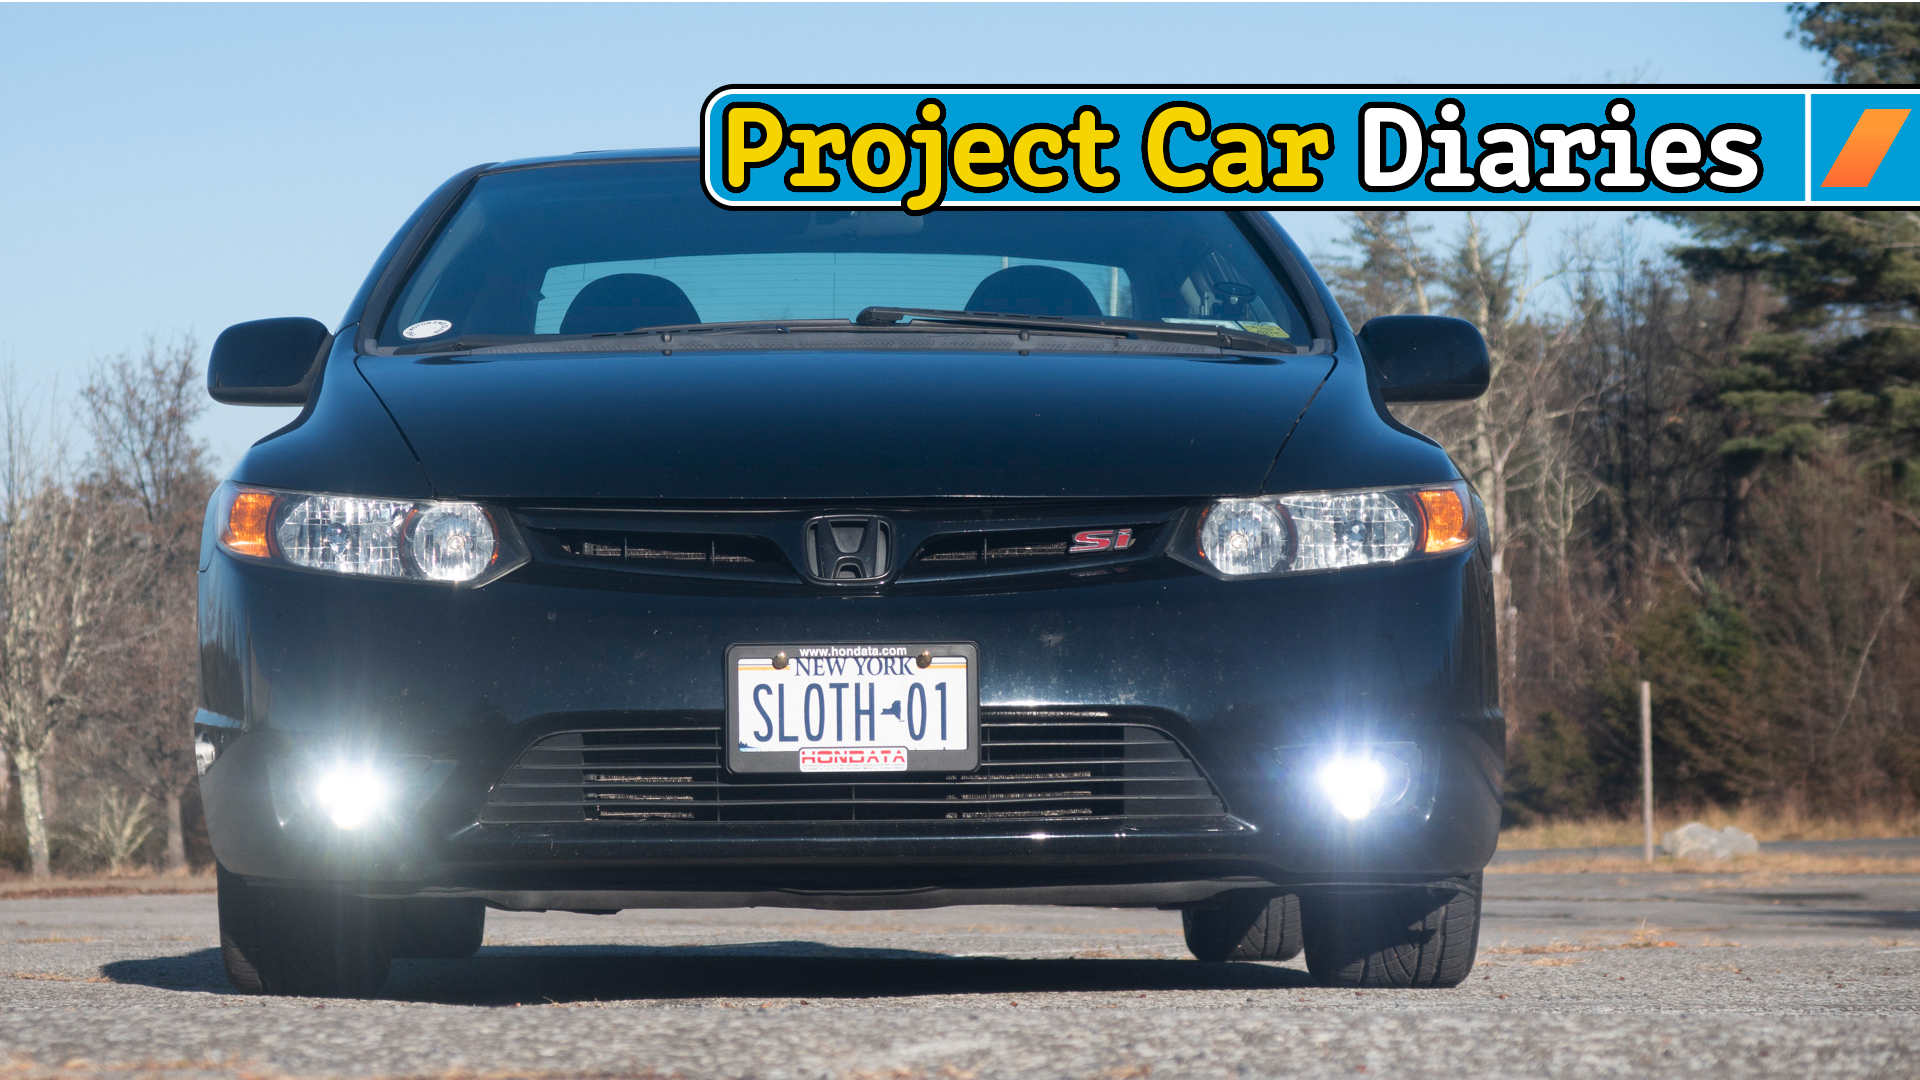 Project Car Diaries: A Simple Honda Civic Intake Swap Turned Into